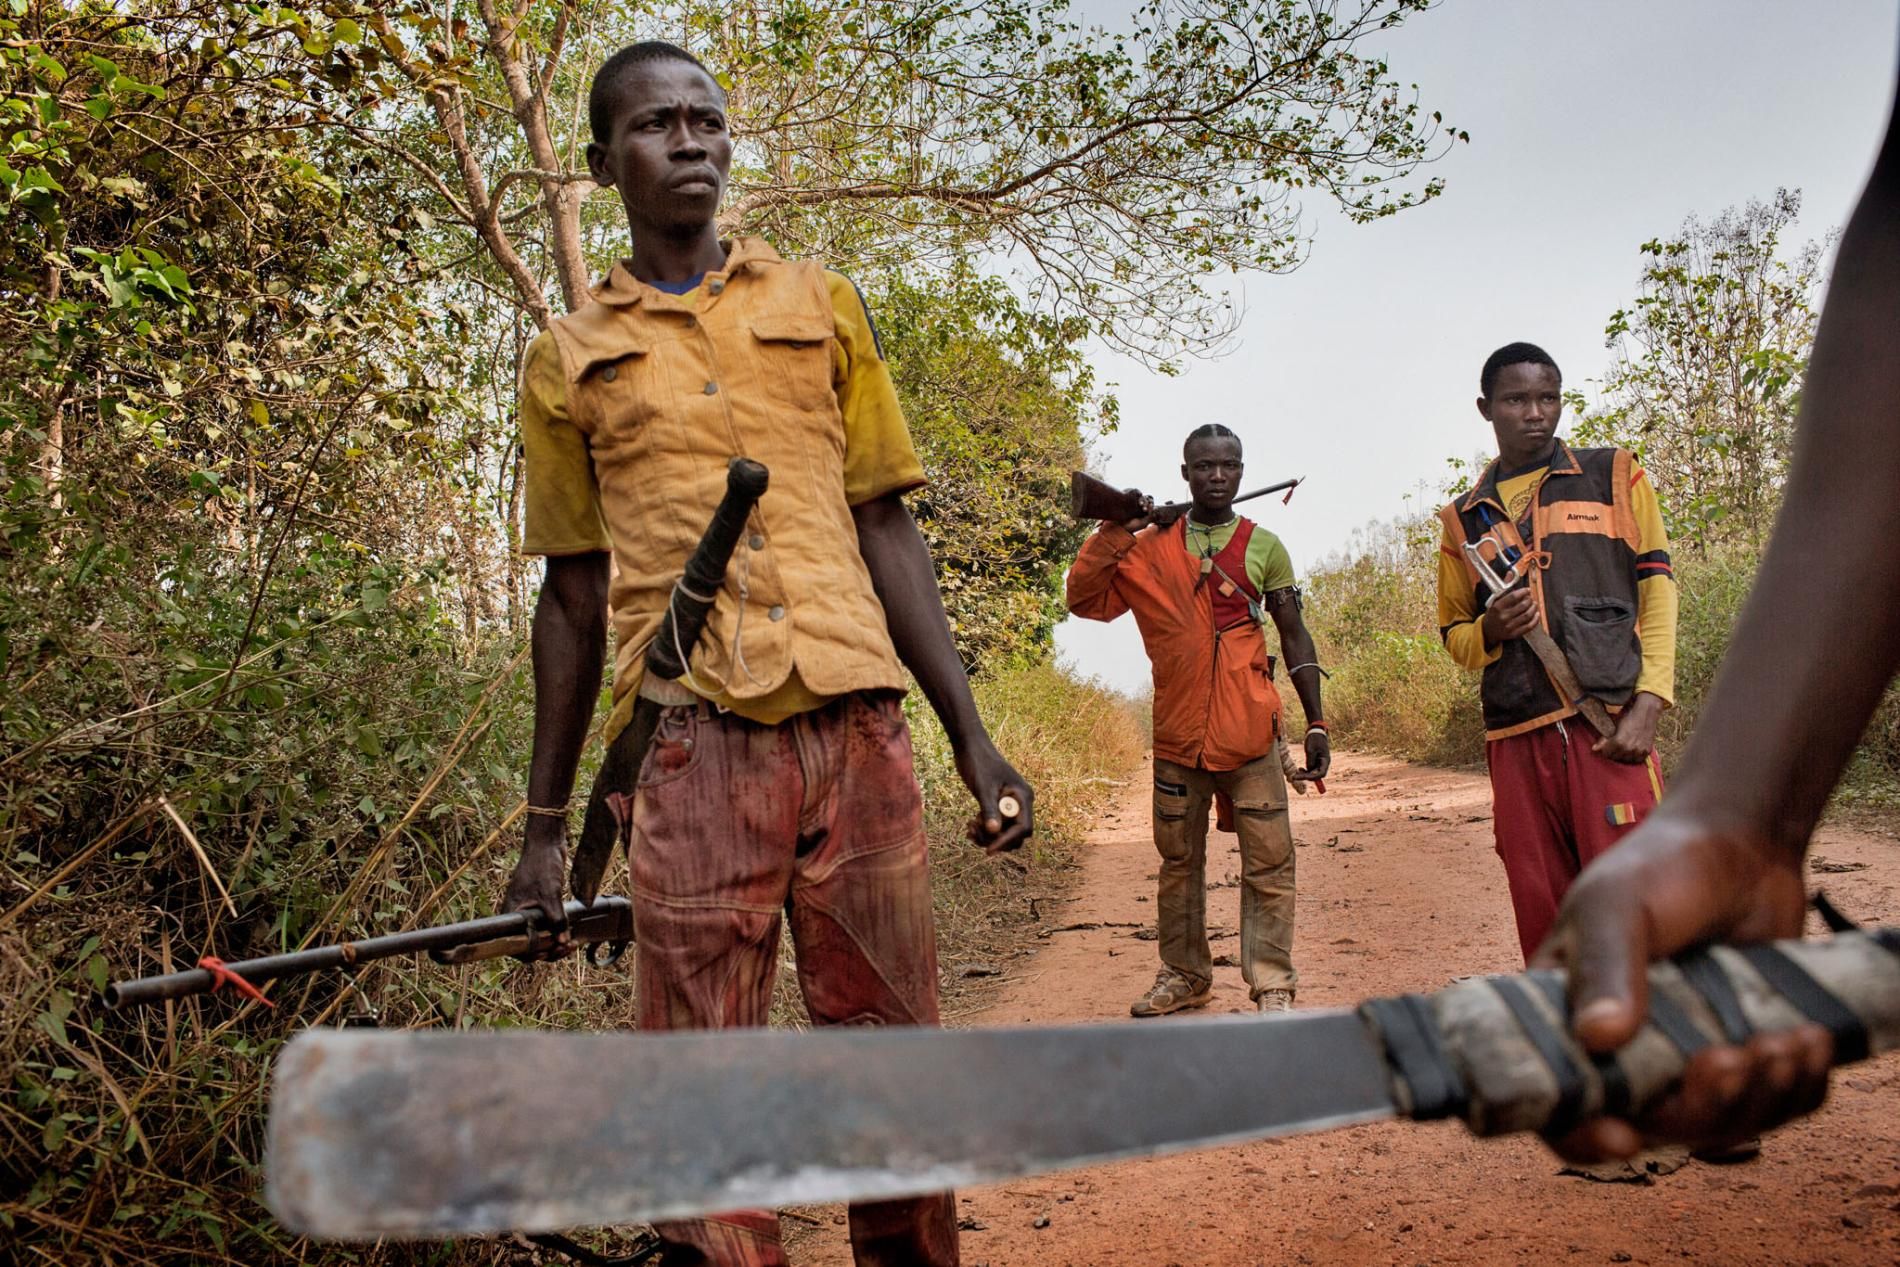 Although religion has little to do with how the conflict started, the violence has since divided the country along religious lines. Rebel groups calling themselves the Seleka (left), composed mostly of Muslims from the north, toppled the government in 2013. The Seleka’s brutal treatment of Christian and animist civilians led to the rise of the Anti-Balaka (right), local militias formed to drive the Seleka out of their towns and villages. Image by Markus Bleasdale. Central African Republic. 